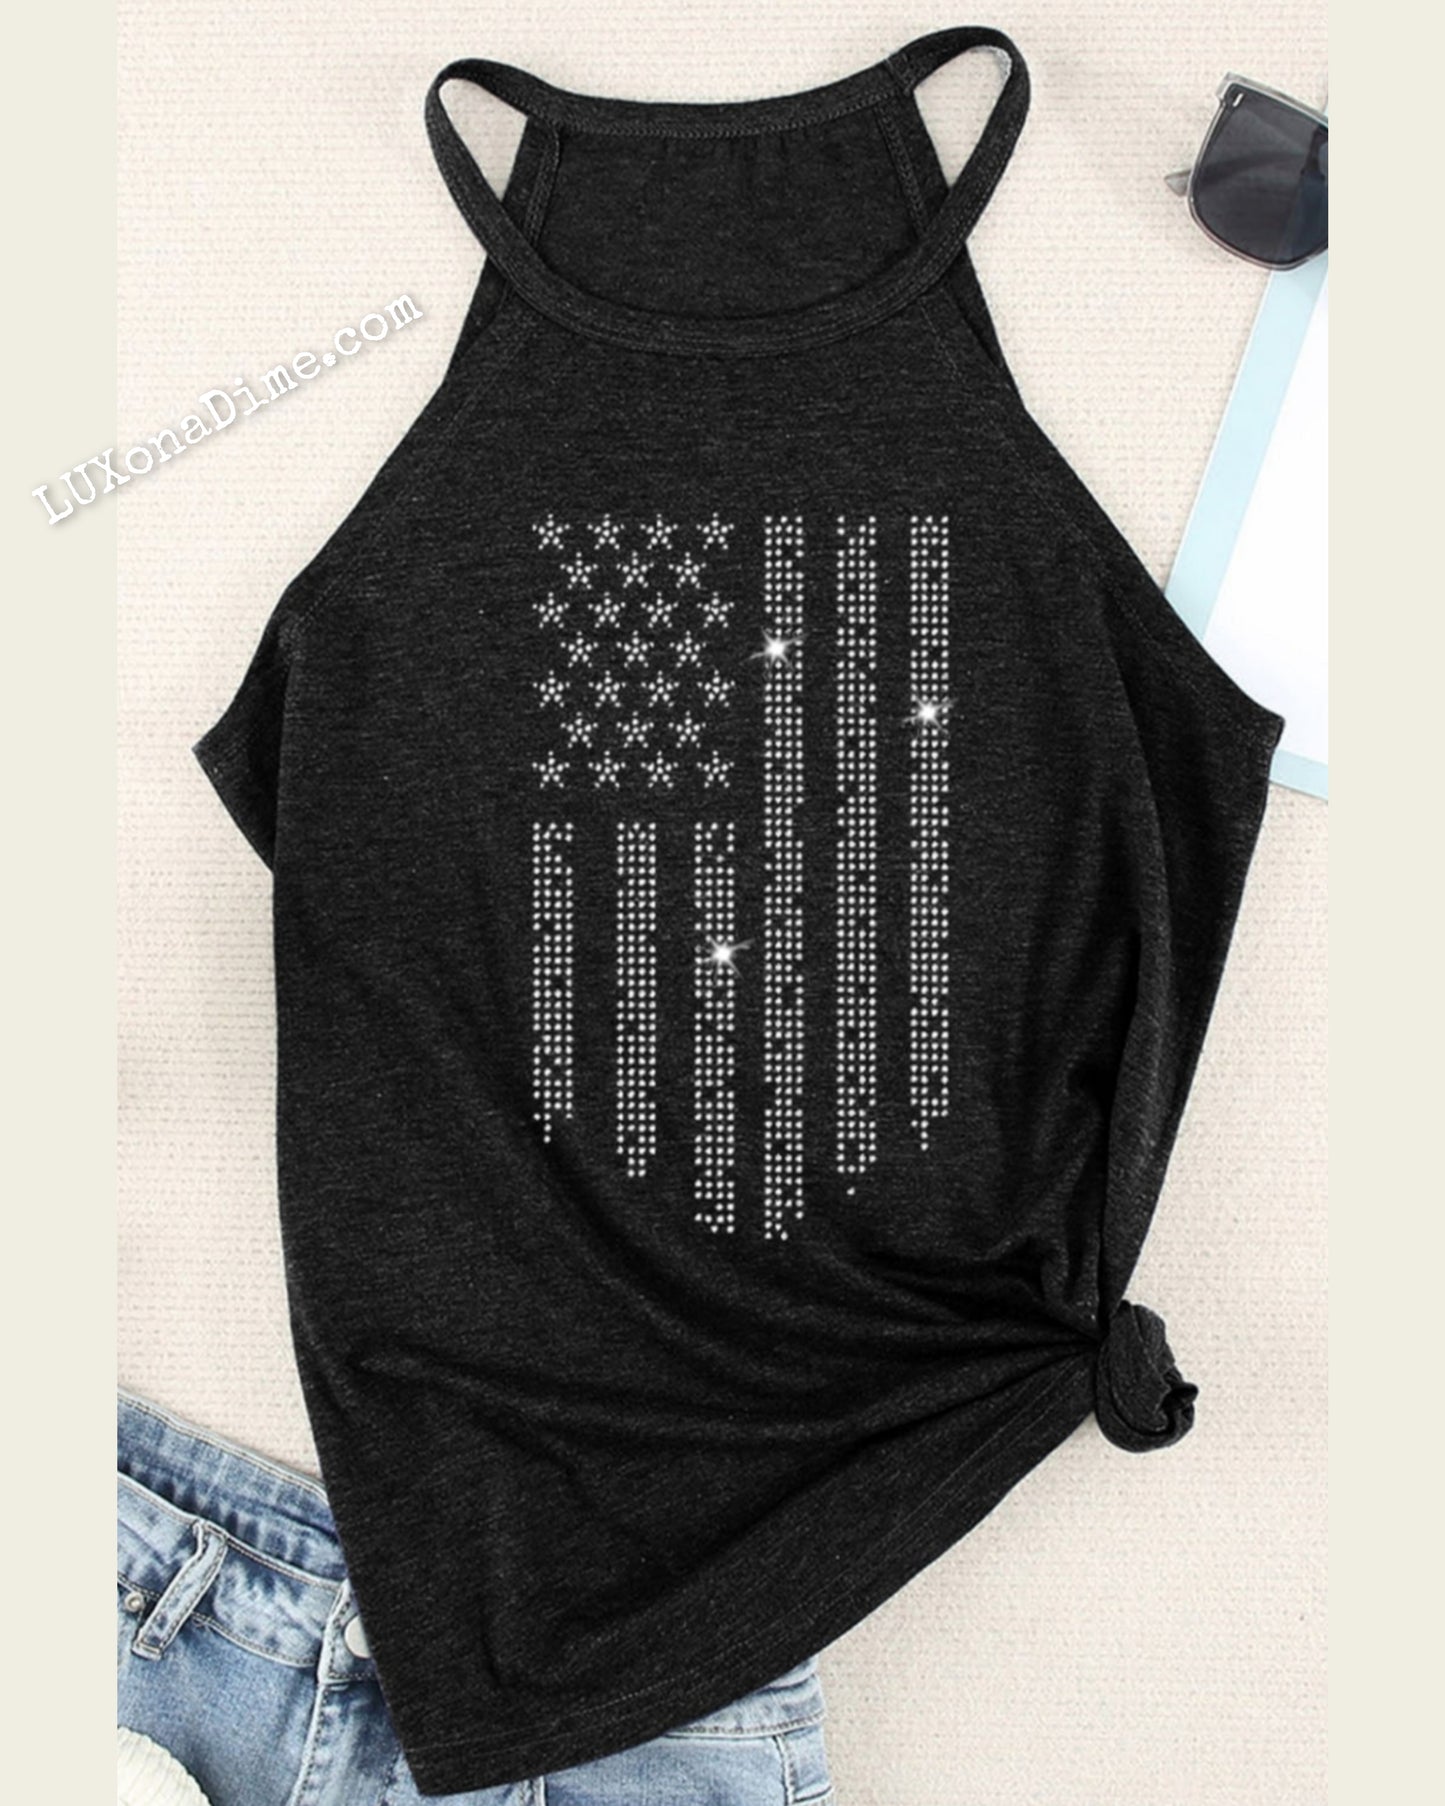 SPARKING Bling American Flag Shirt Patriotic Graphic Tank Top
(Plus Size Available)